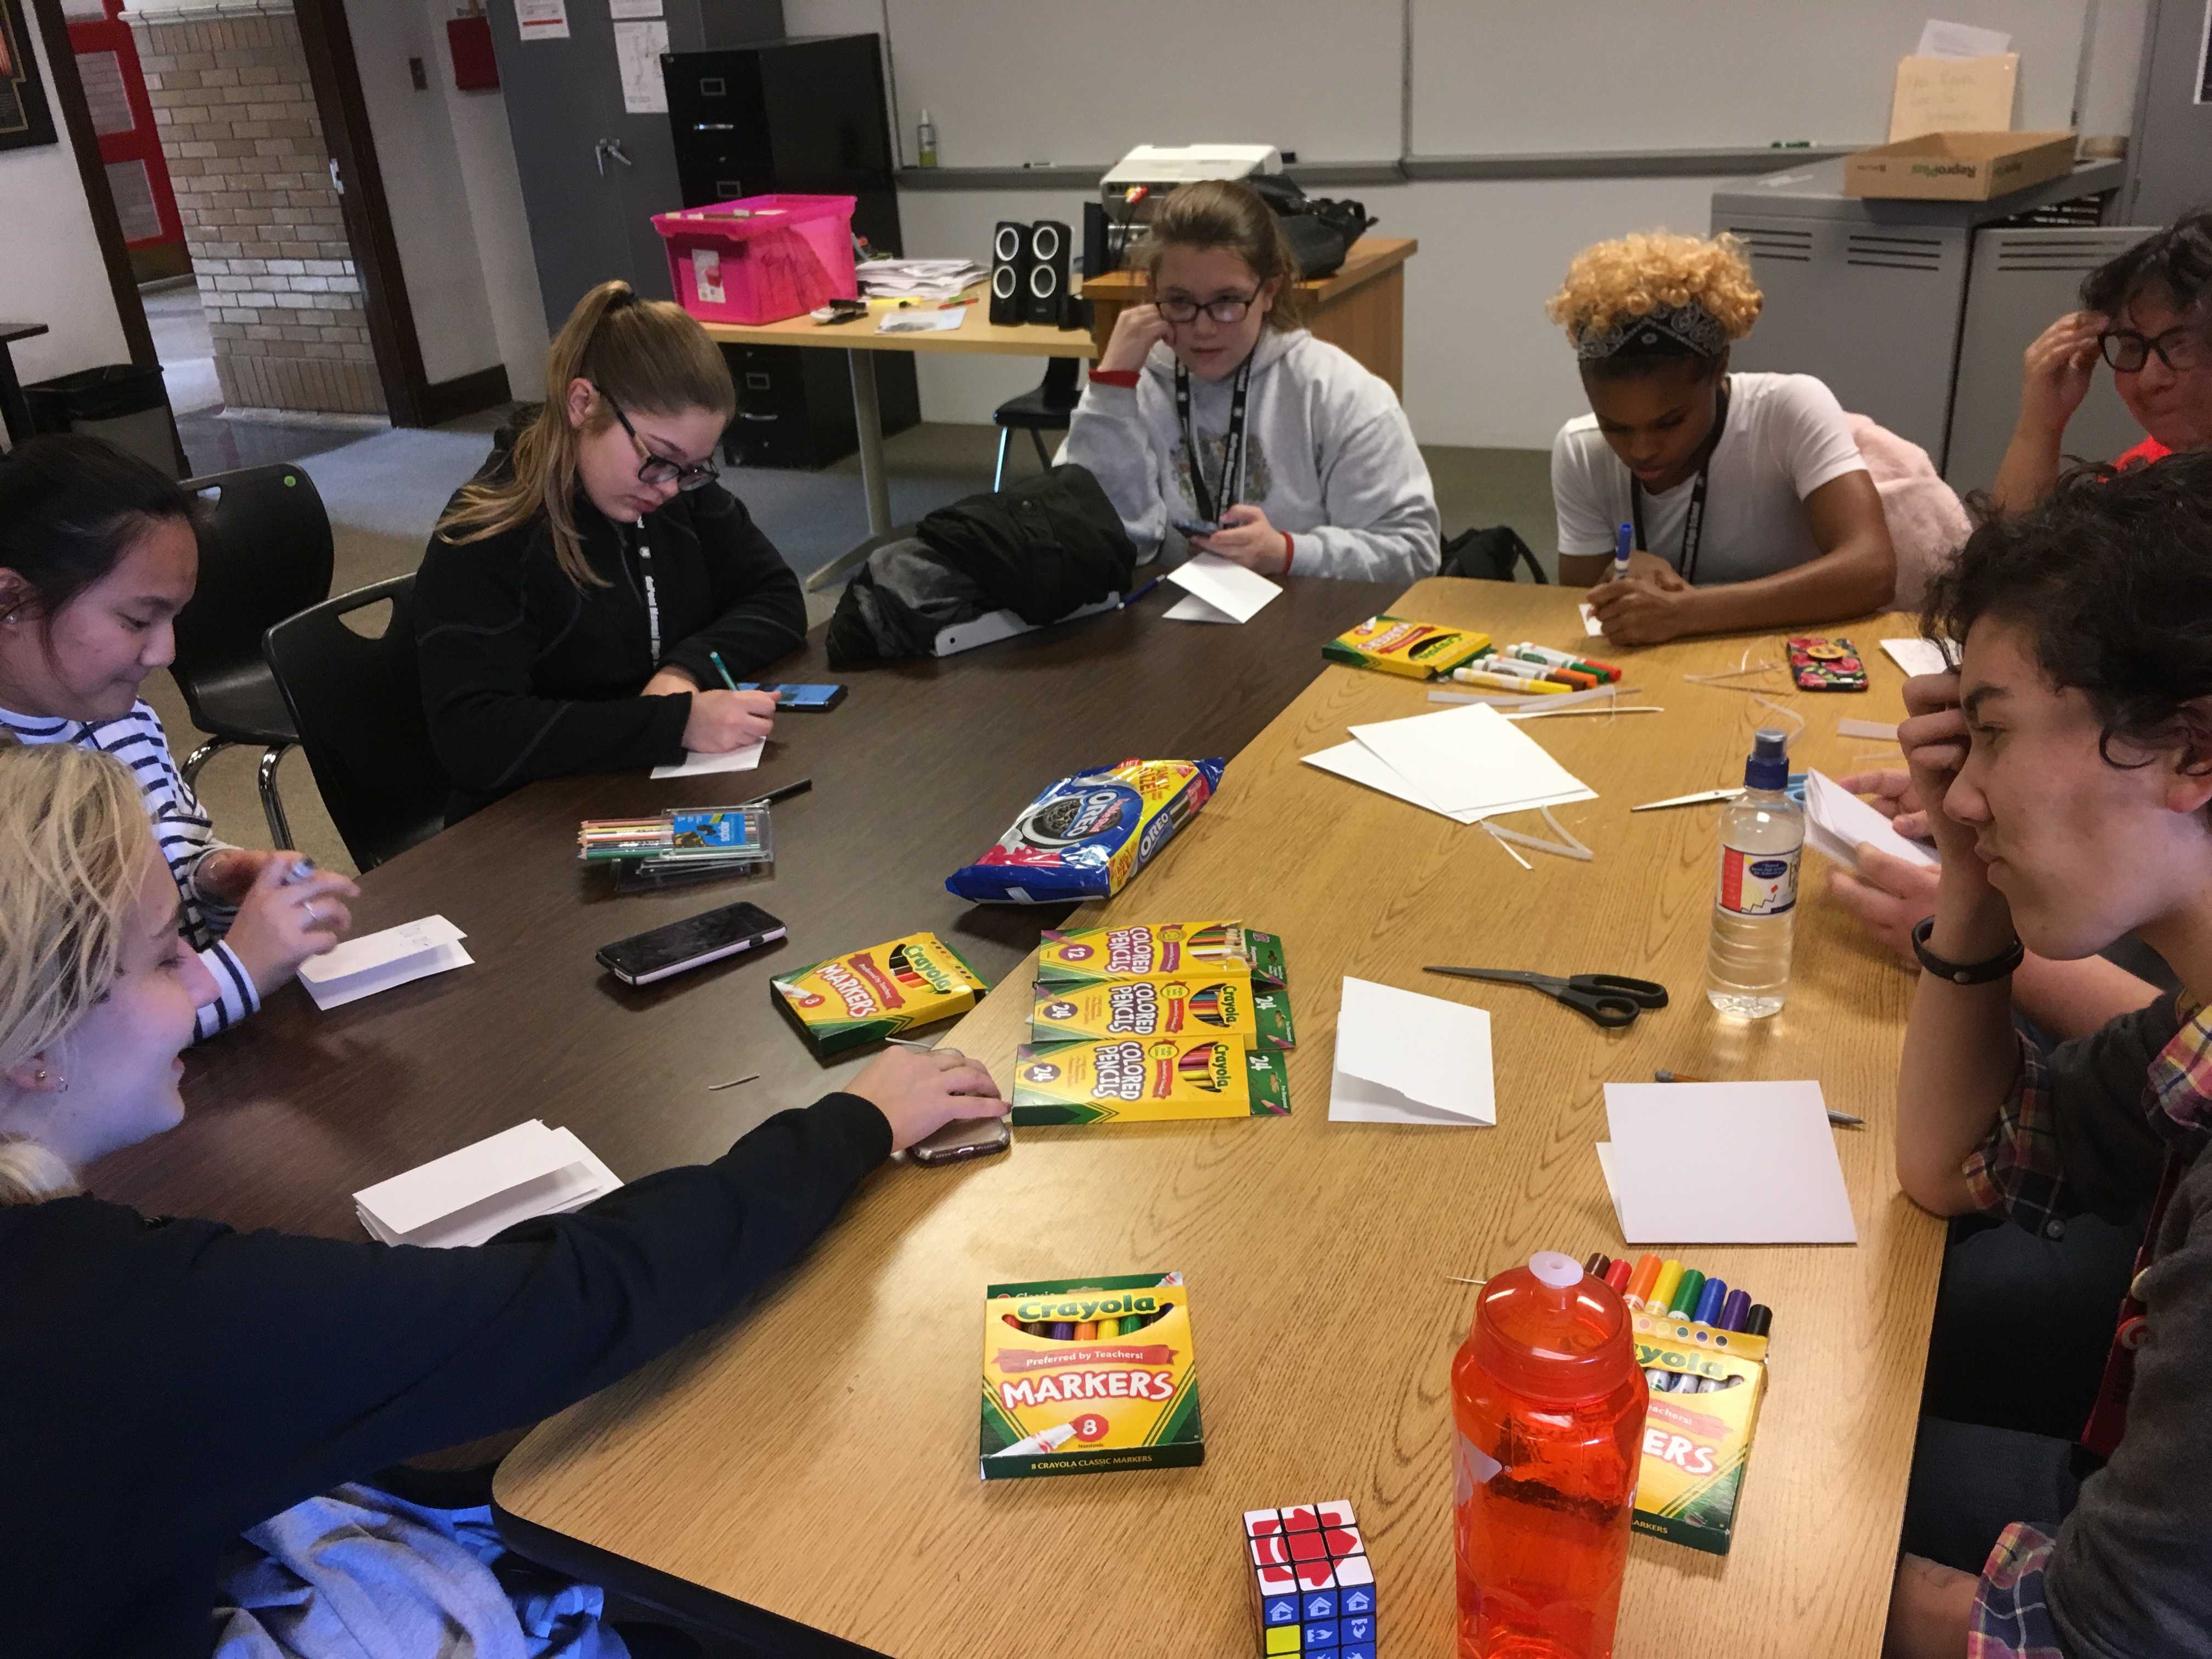 Students at Manuals RAMdom acts of kindness club make cards for women in rehab. Photo by Adrienne Sato